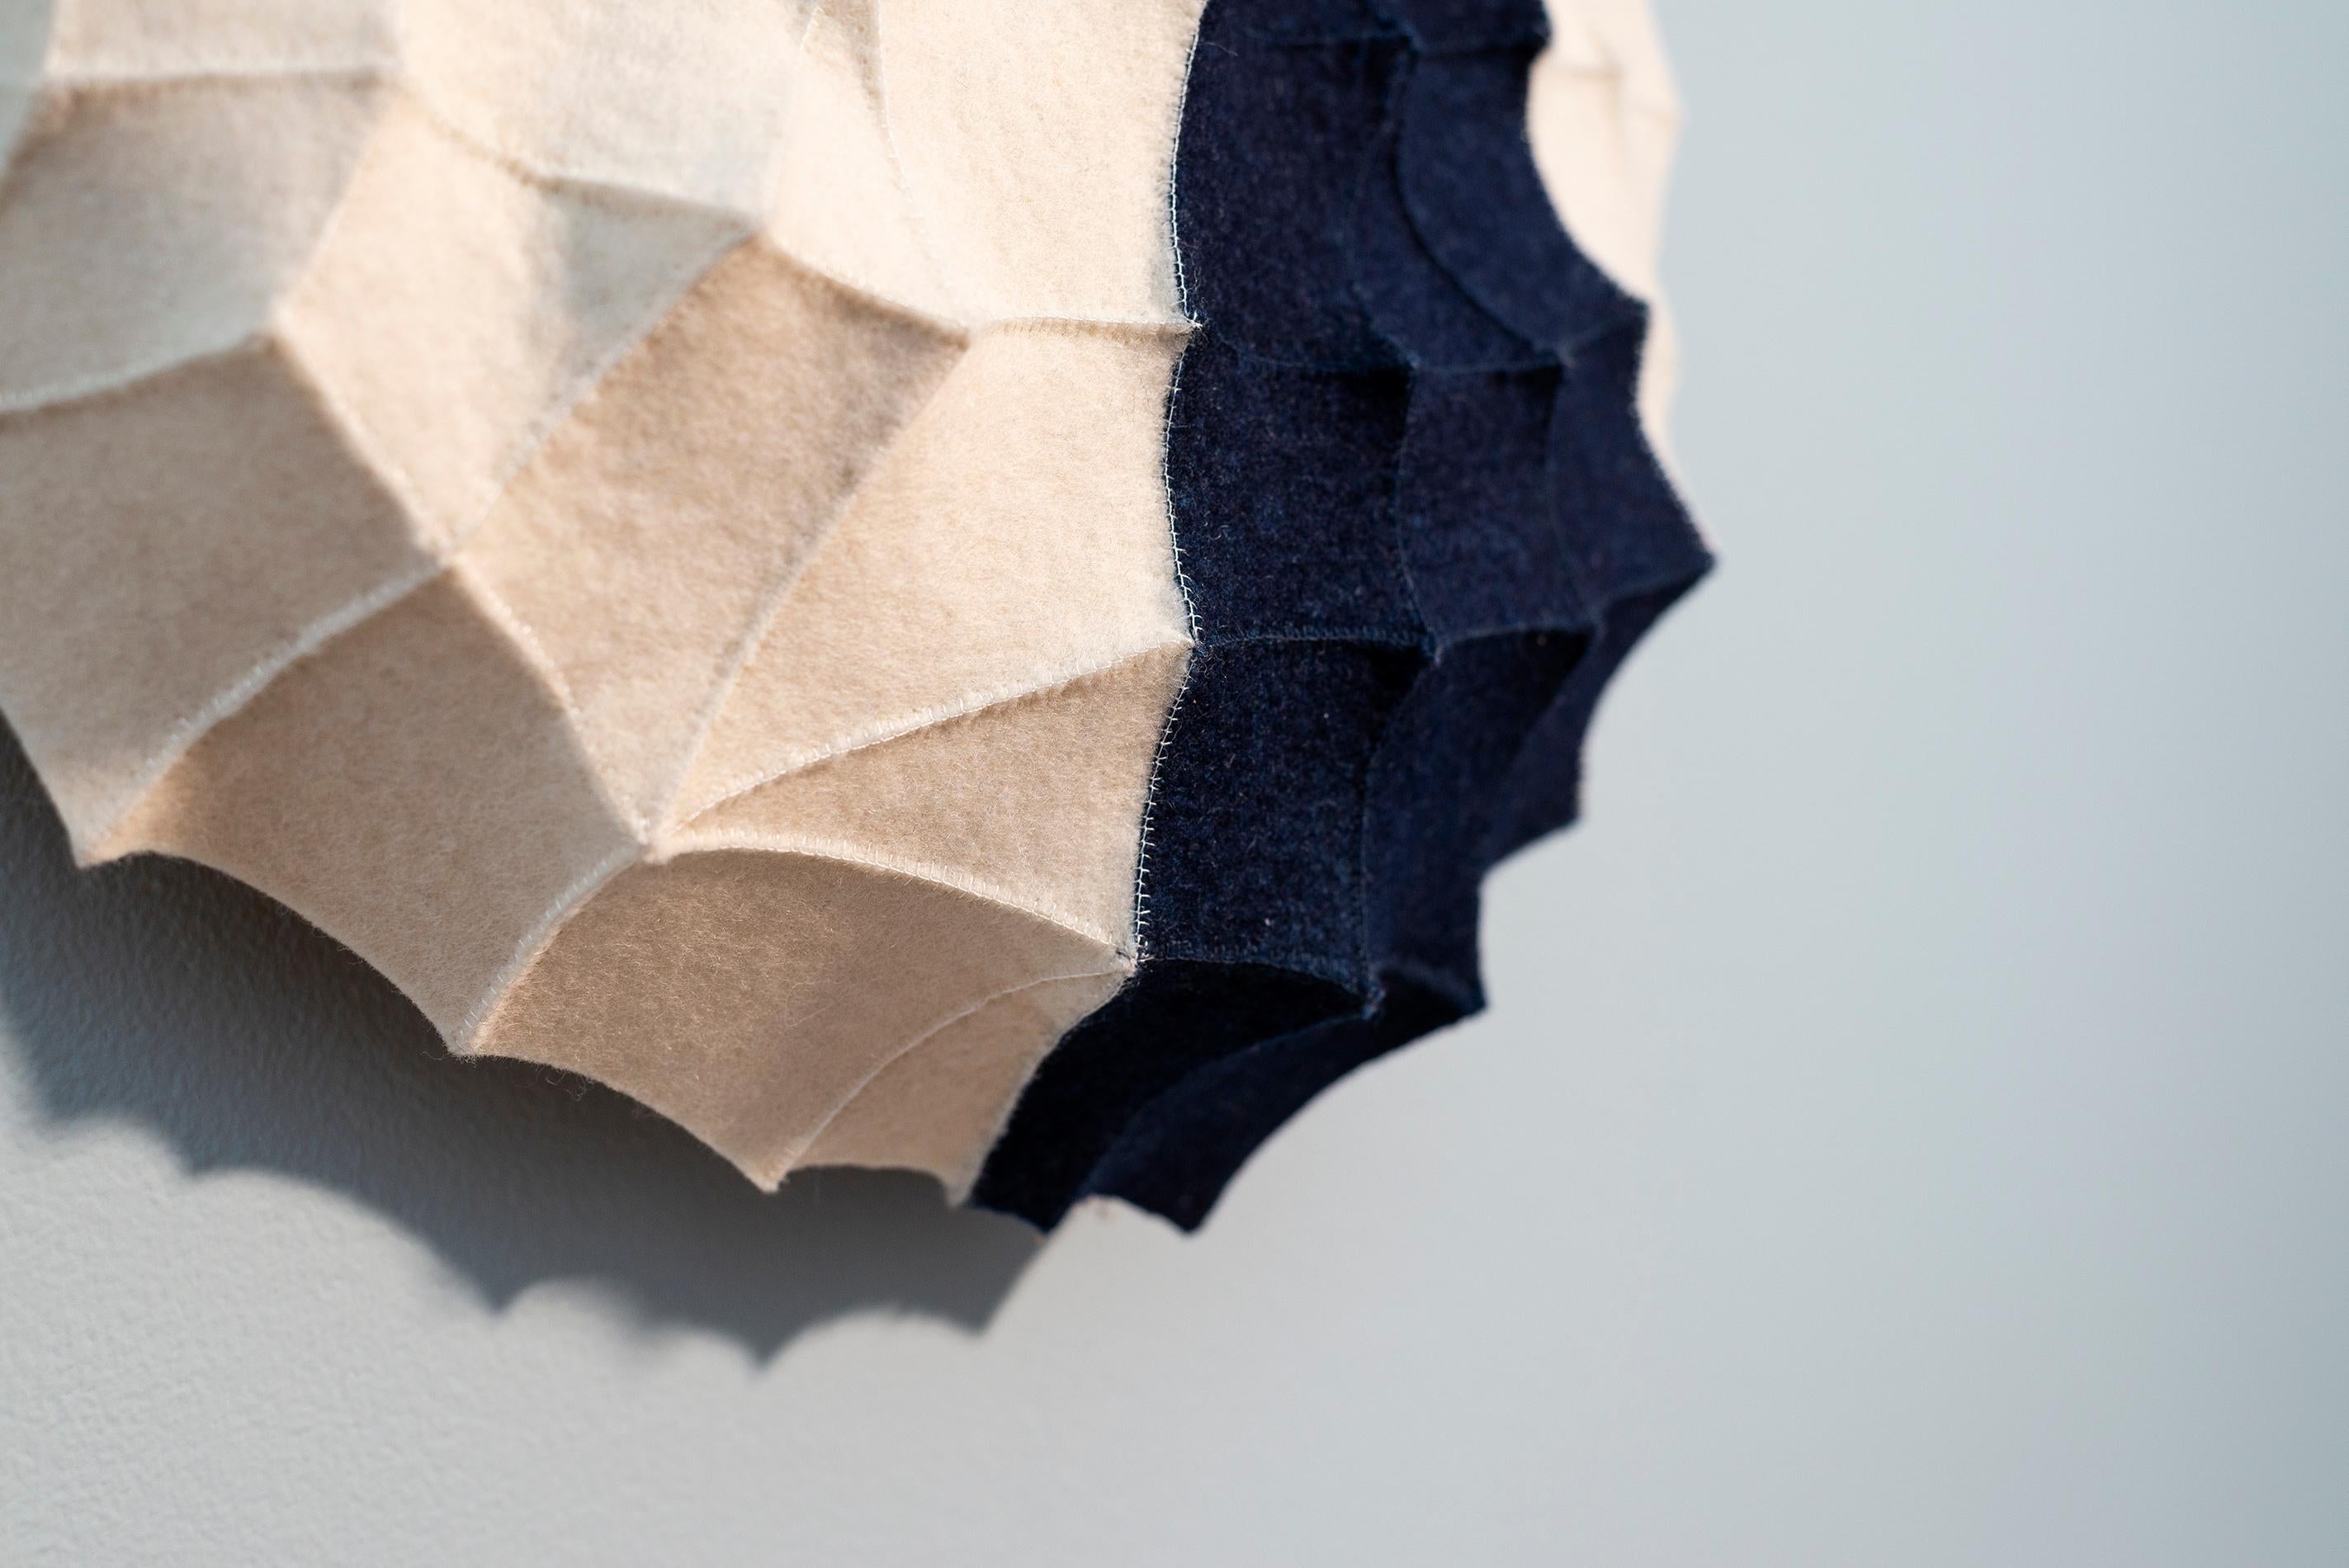 Chung-Im Kim’s striking fibre art is inspired by the intricate designs and beauty she sees in nature. This series of contemporary wall sculptures are hand sewn from industrial felt. The elegant indigo detail pops against the white backdrop